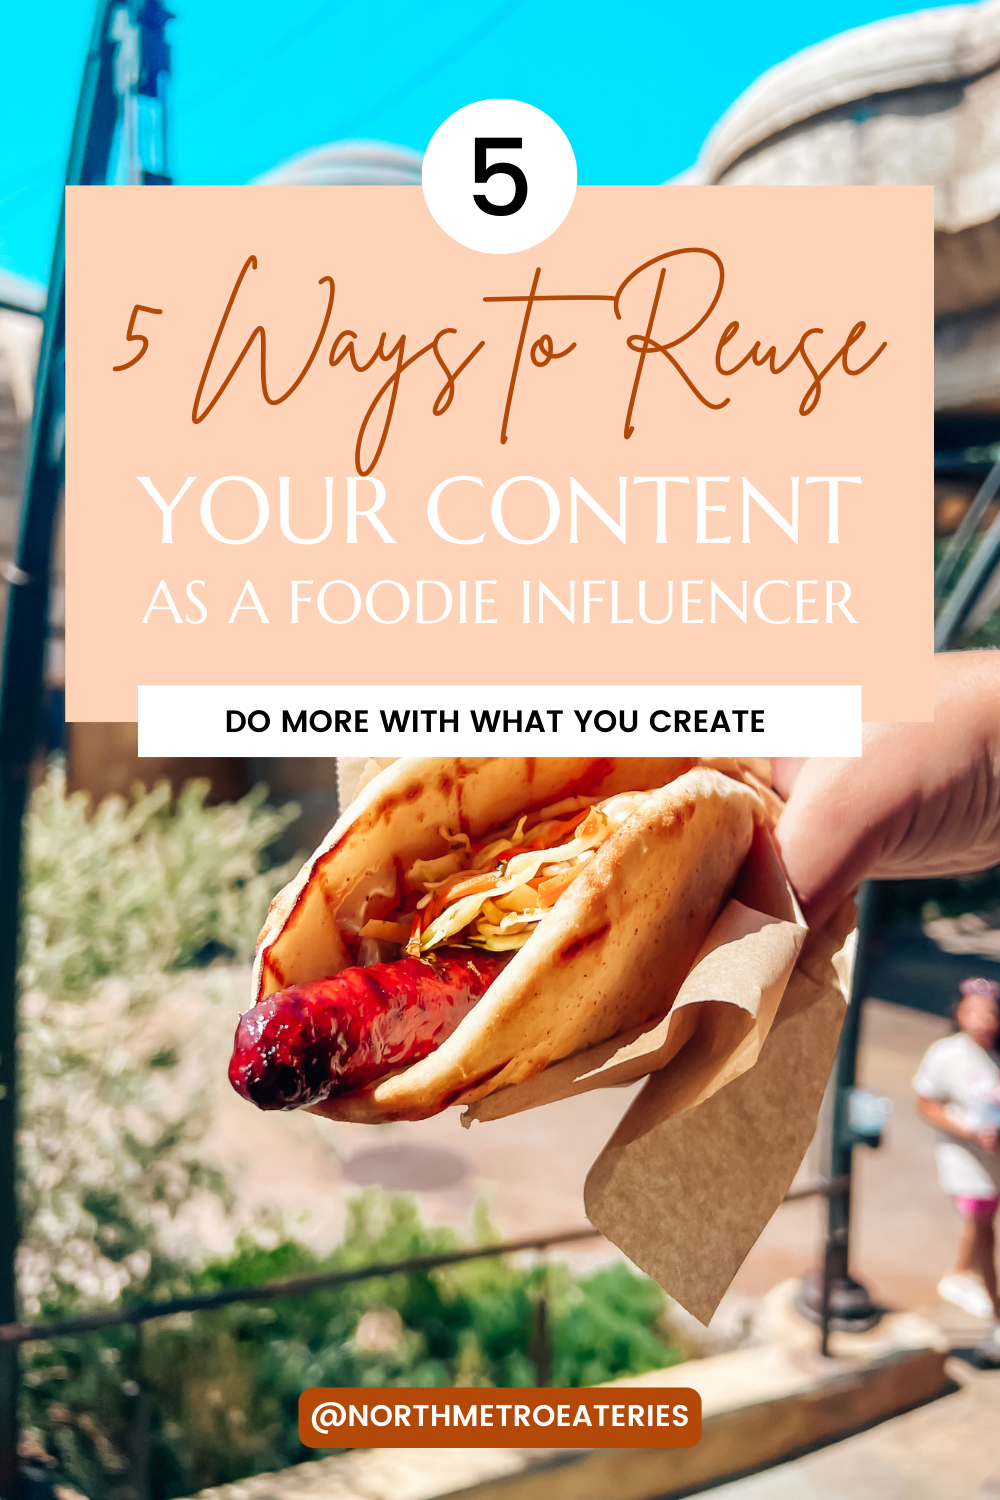 5 Ways to Reuse Your Content as a Foodie Influencer